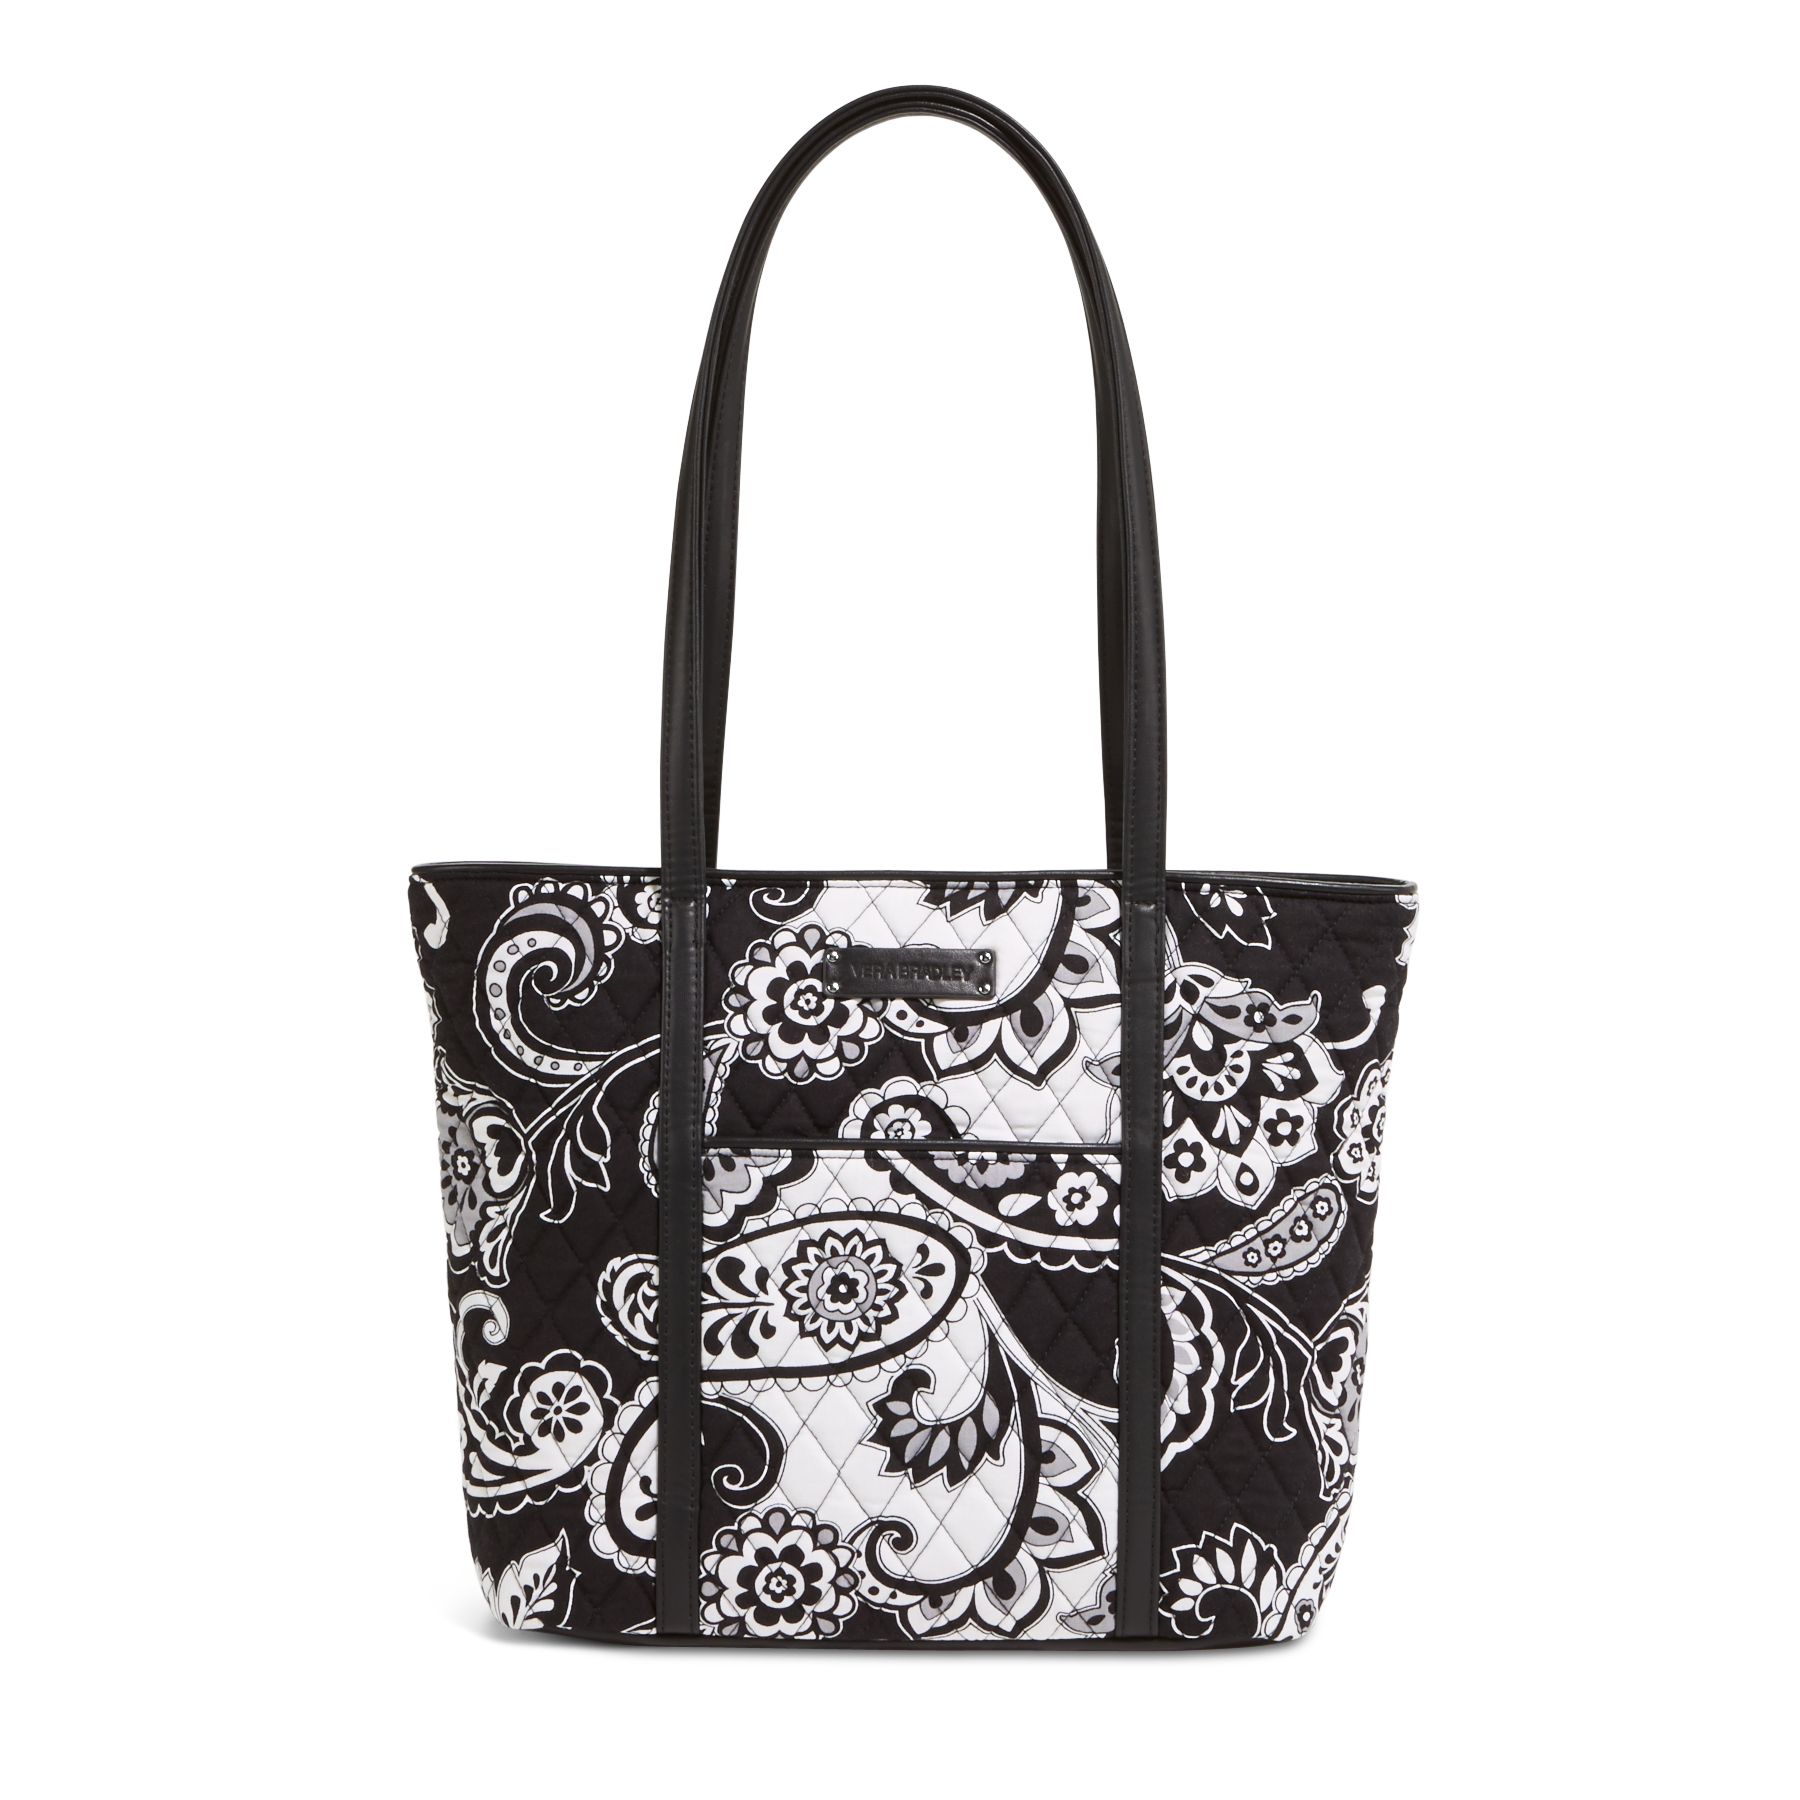 Vera Bradley Small Trimmed Vera Tote in Midnight Paisley with Black ...